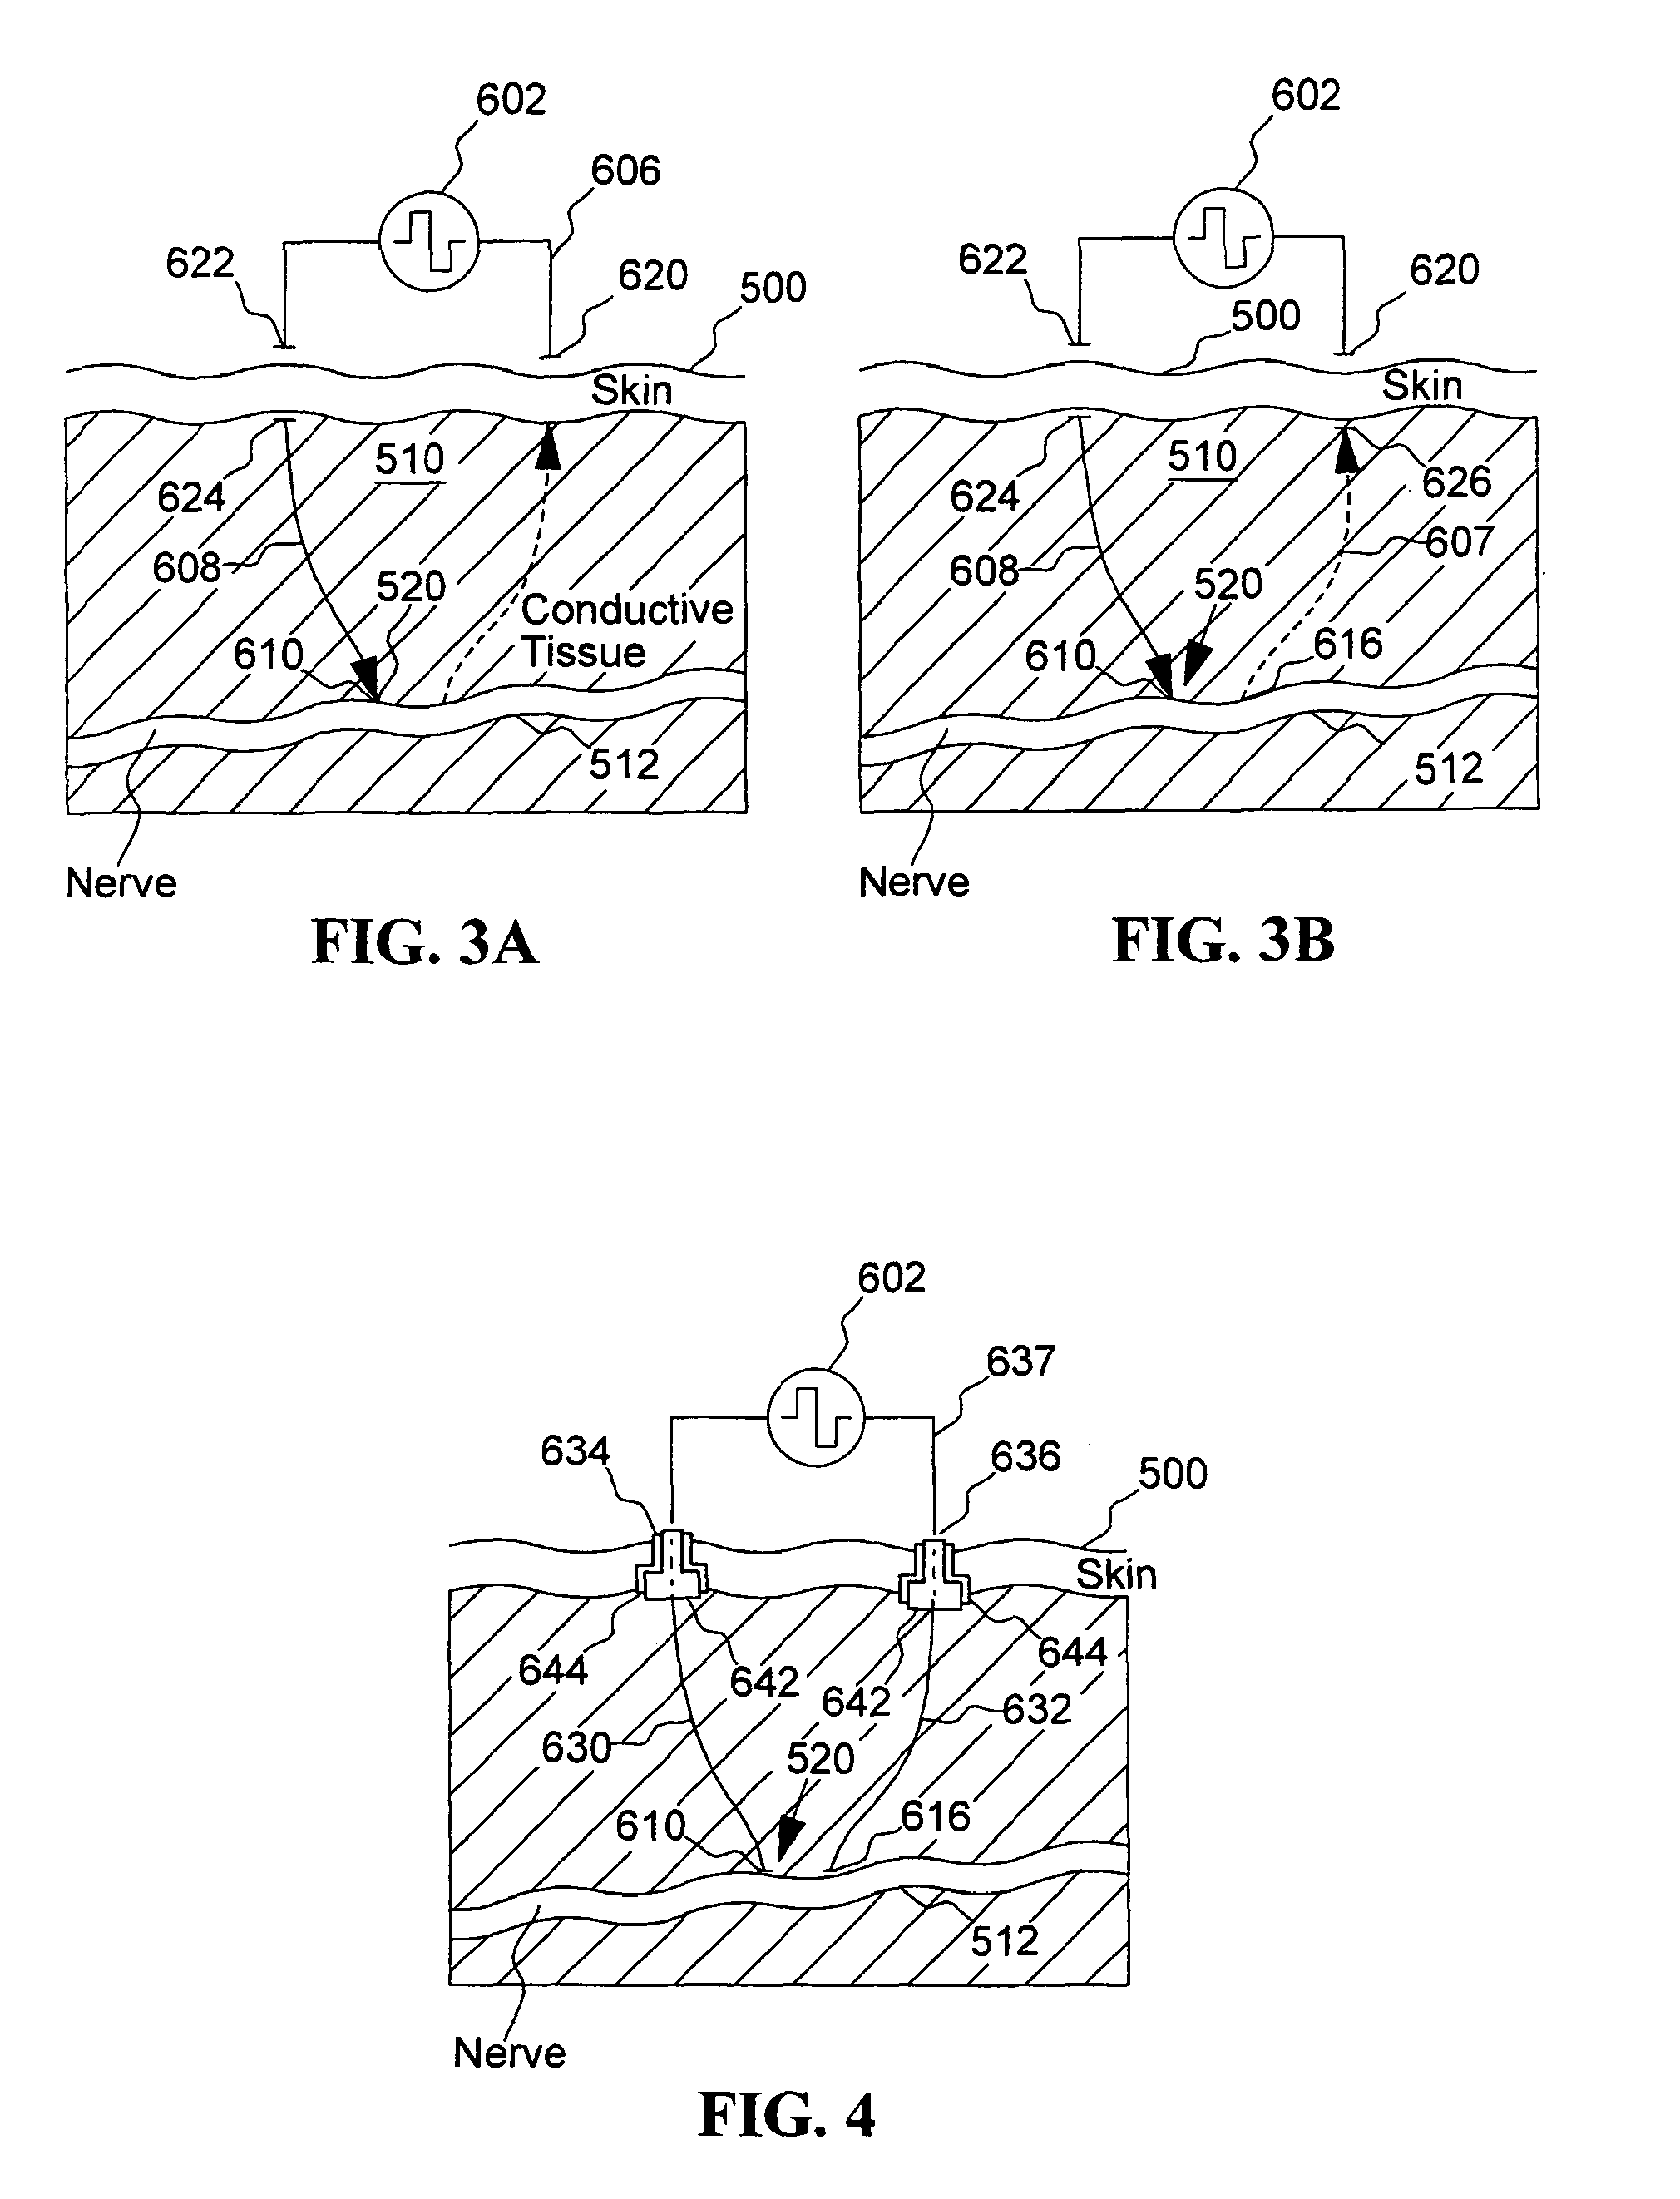 Neural stimulator with percutaneous connectivity